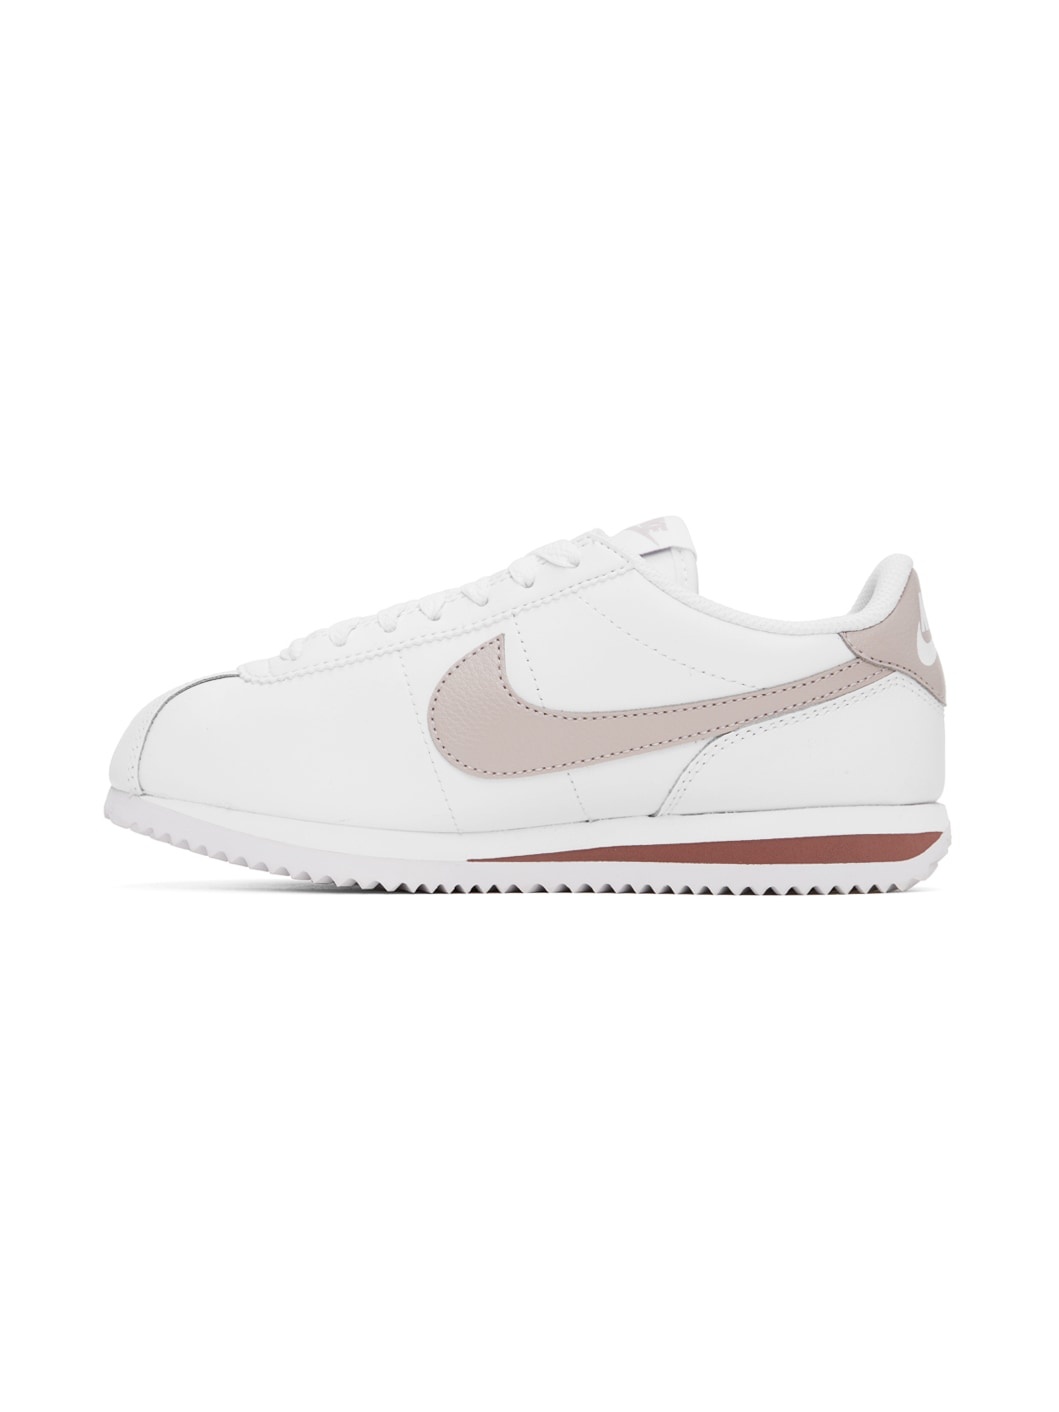 White & Pink Cortez Sneakers - 3